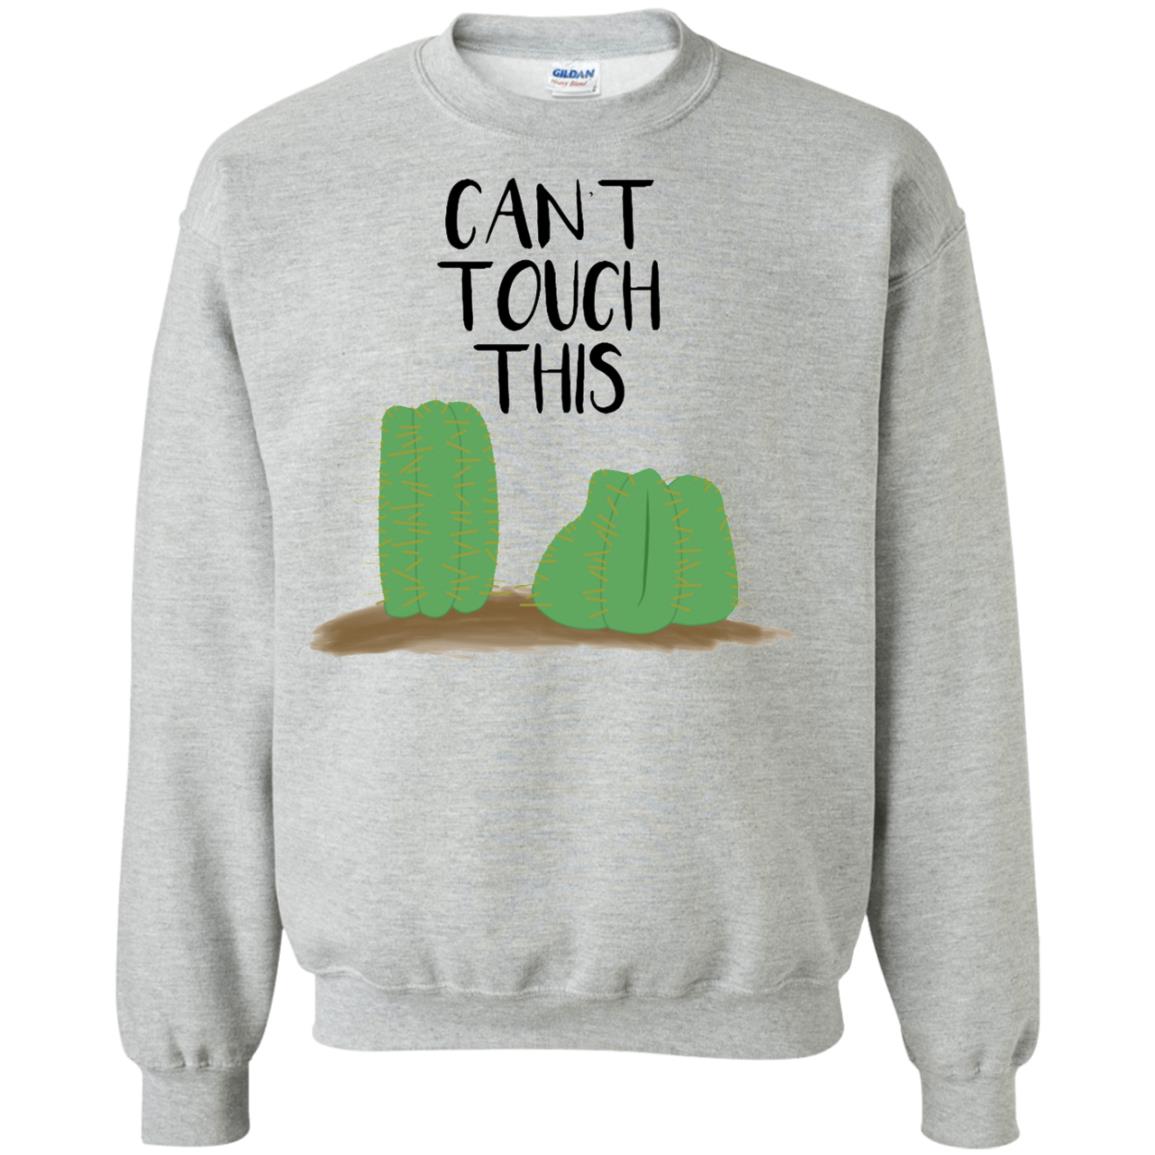 can't touch this cactus sweatshirt - sport grey